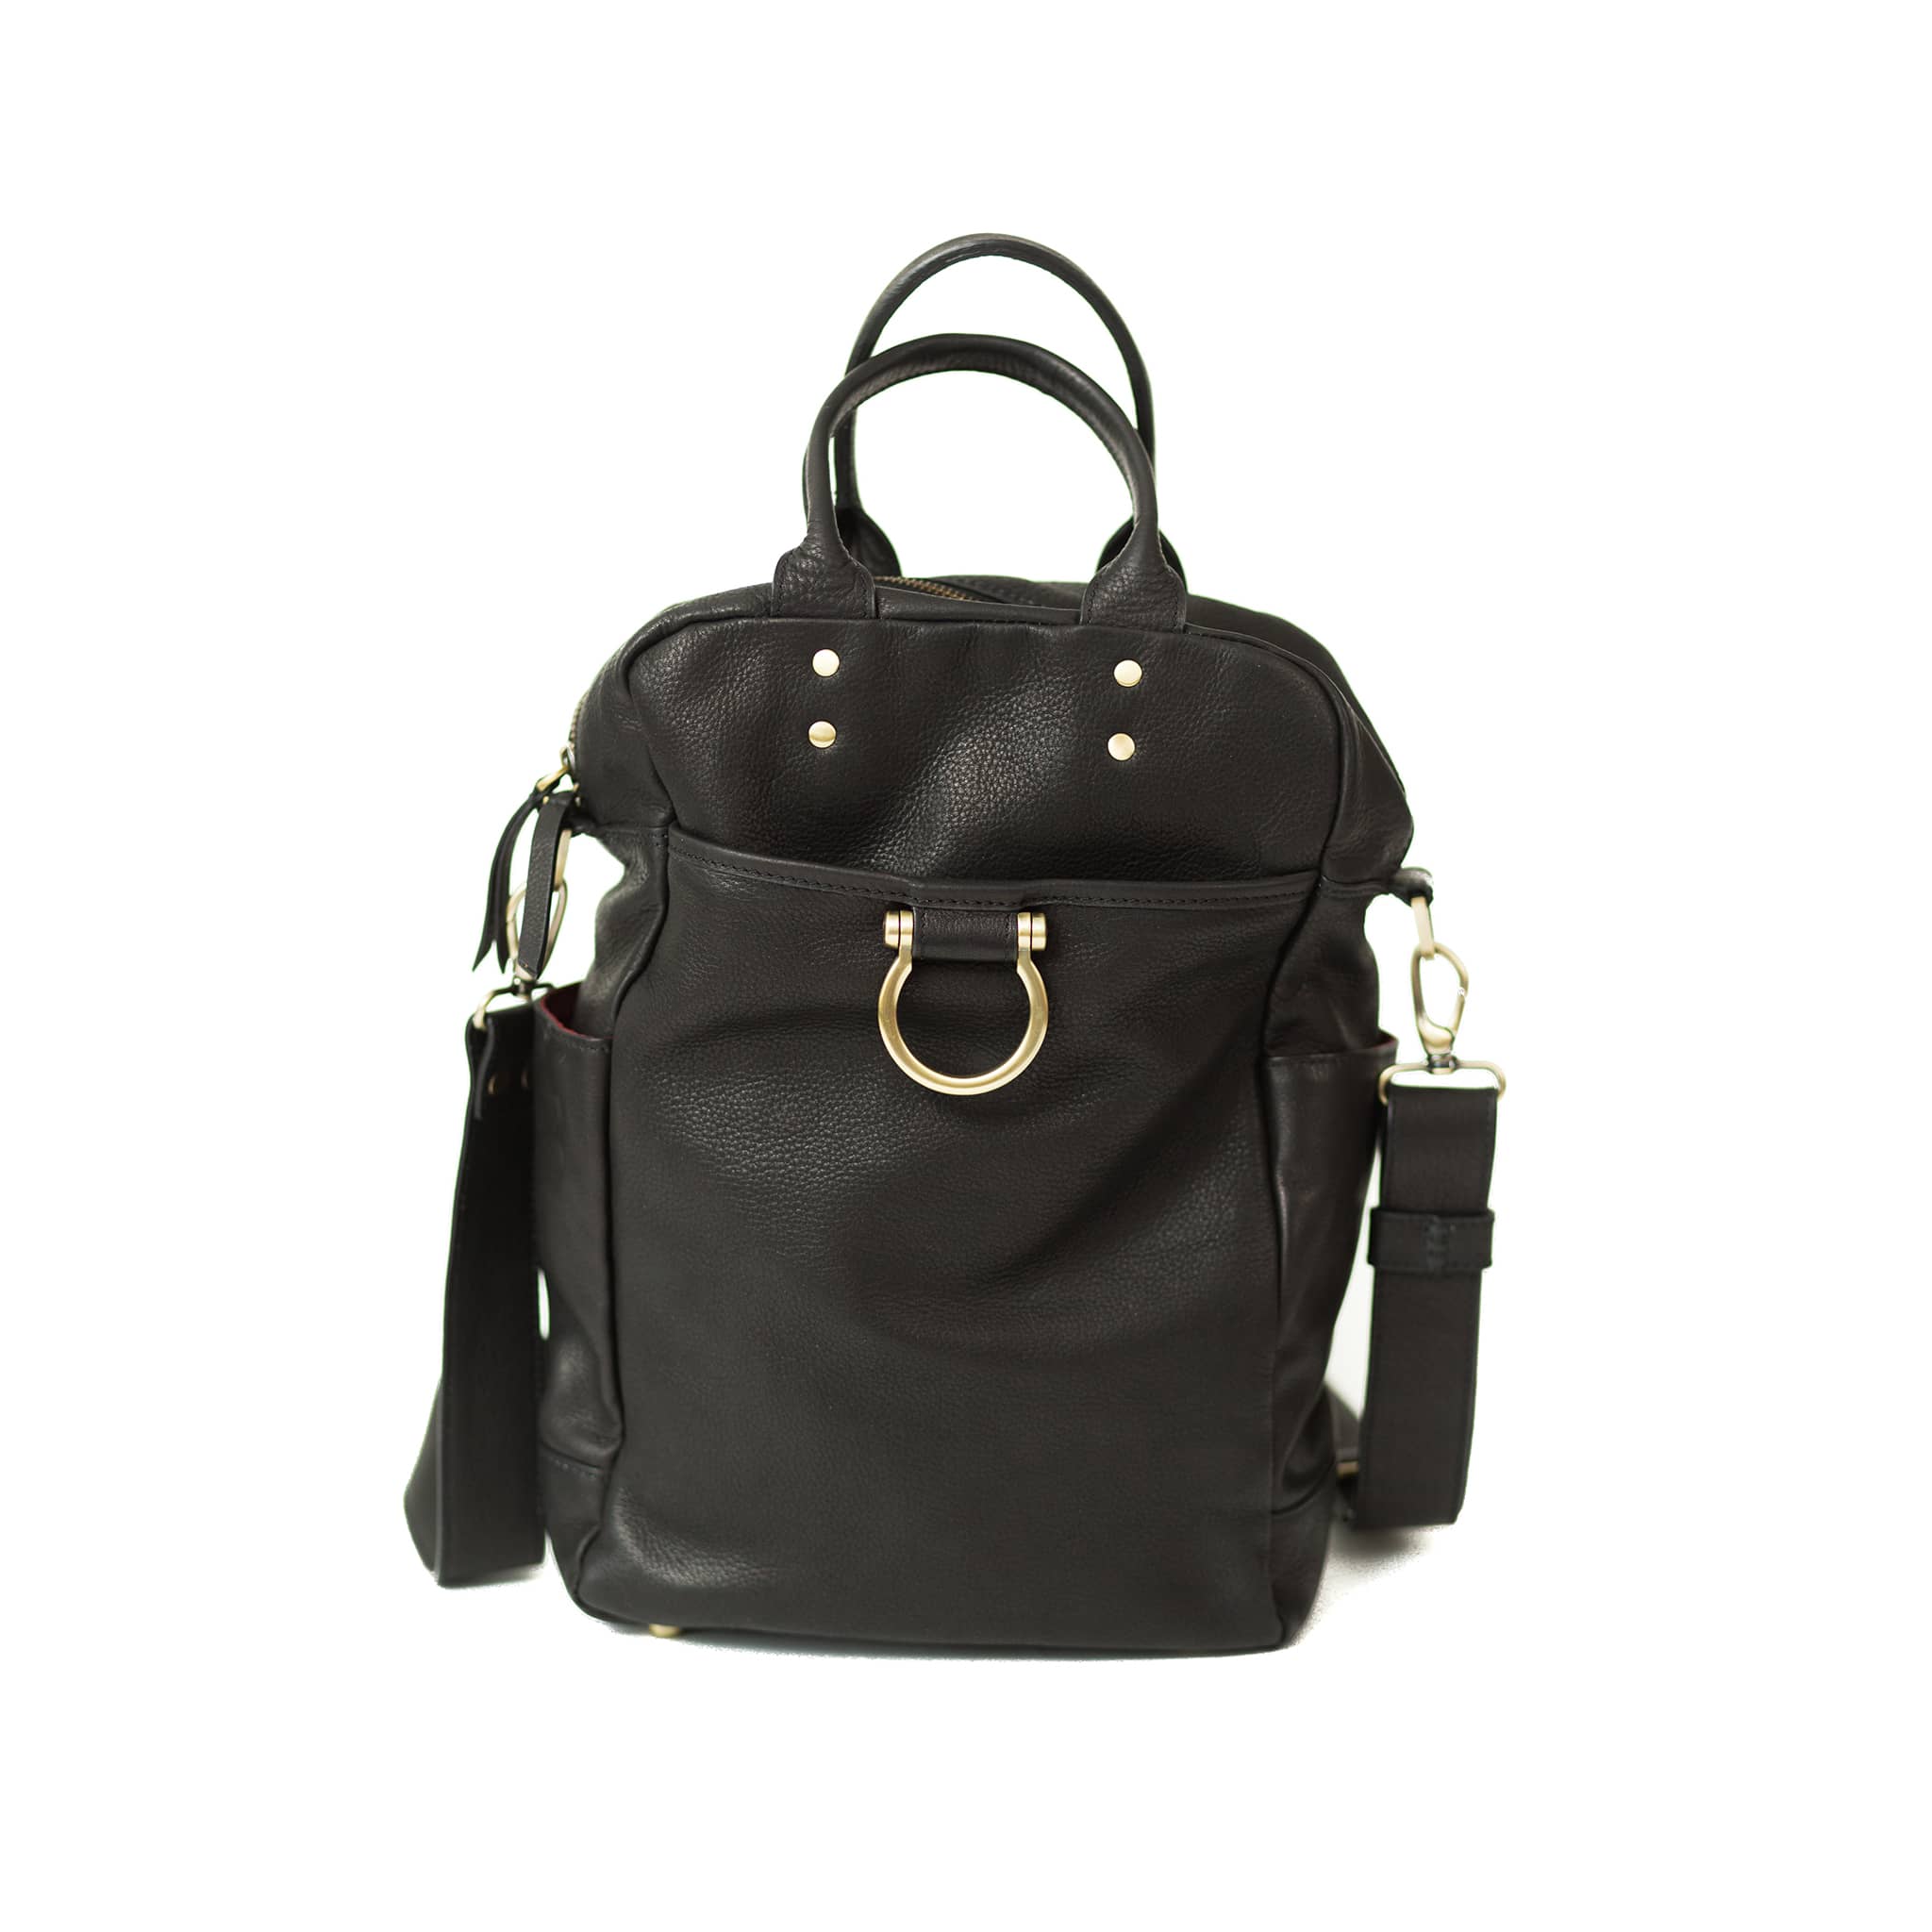 The Rodica leather backpack in black raw leather has 2 main zip compartments, 2 side pockets, and a removable, adjustable strap.